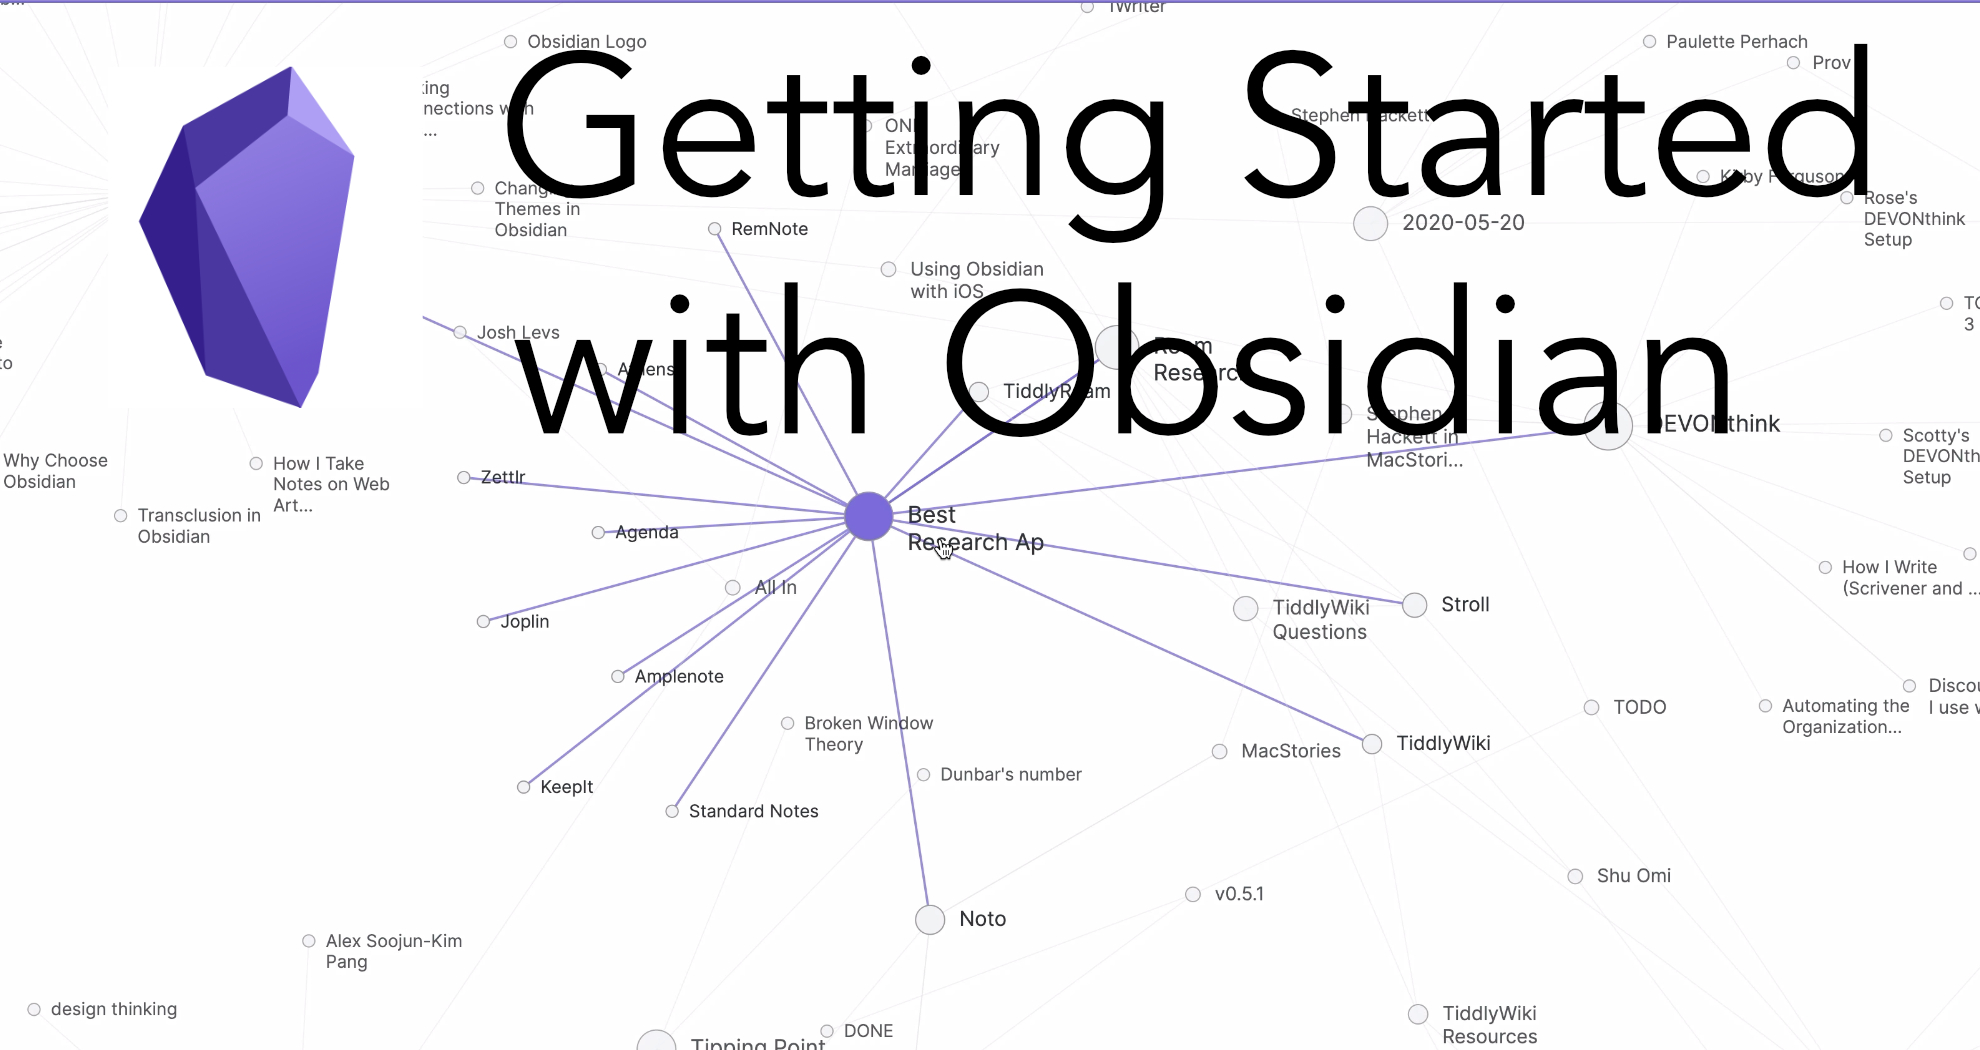 Getting Started with Networked Thought in Obsidian